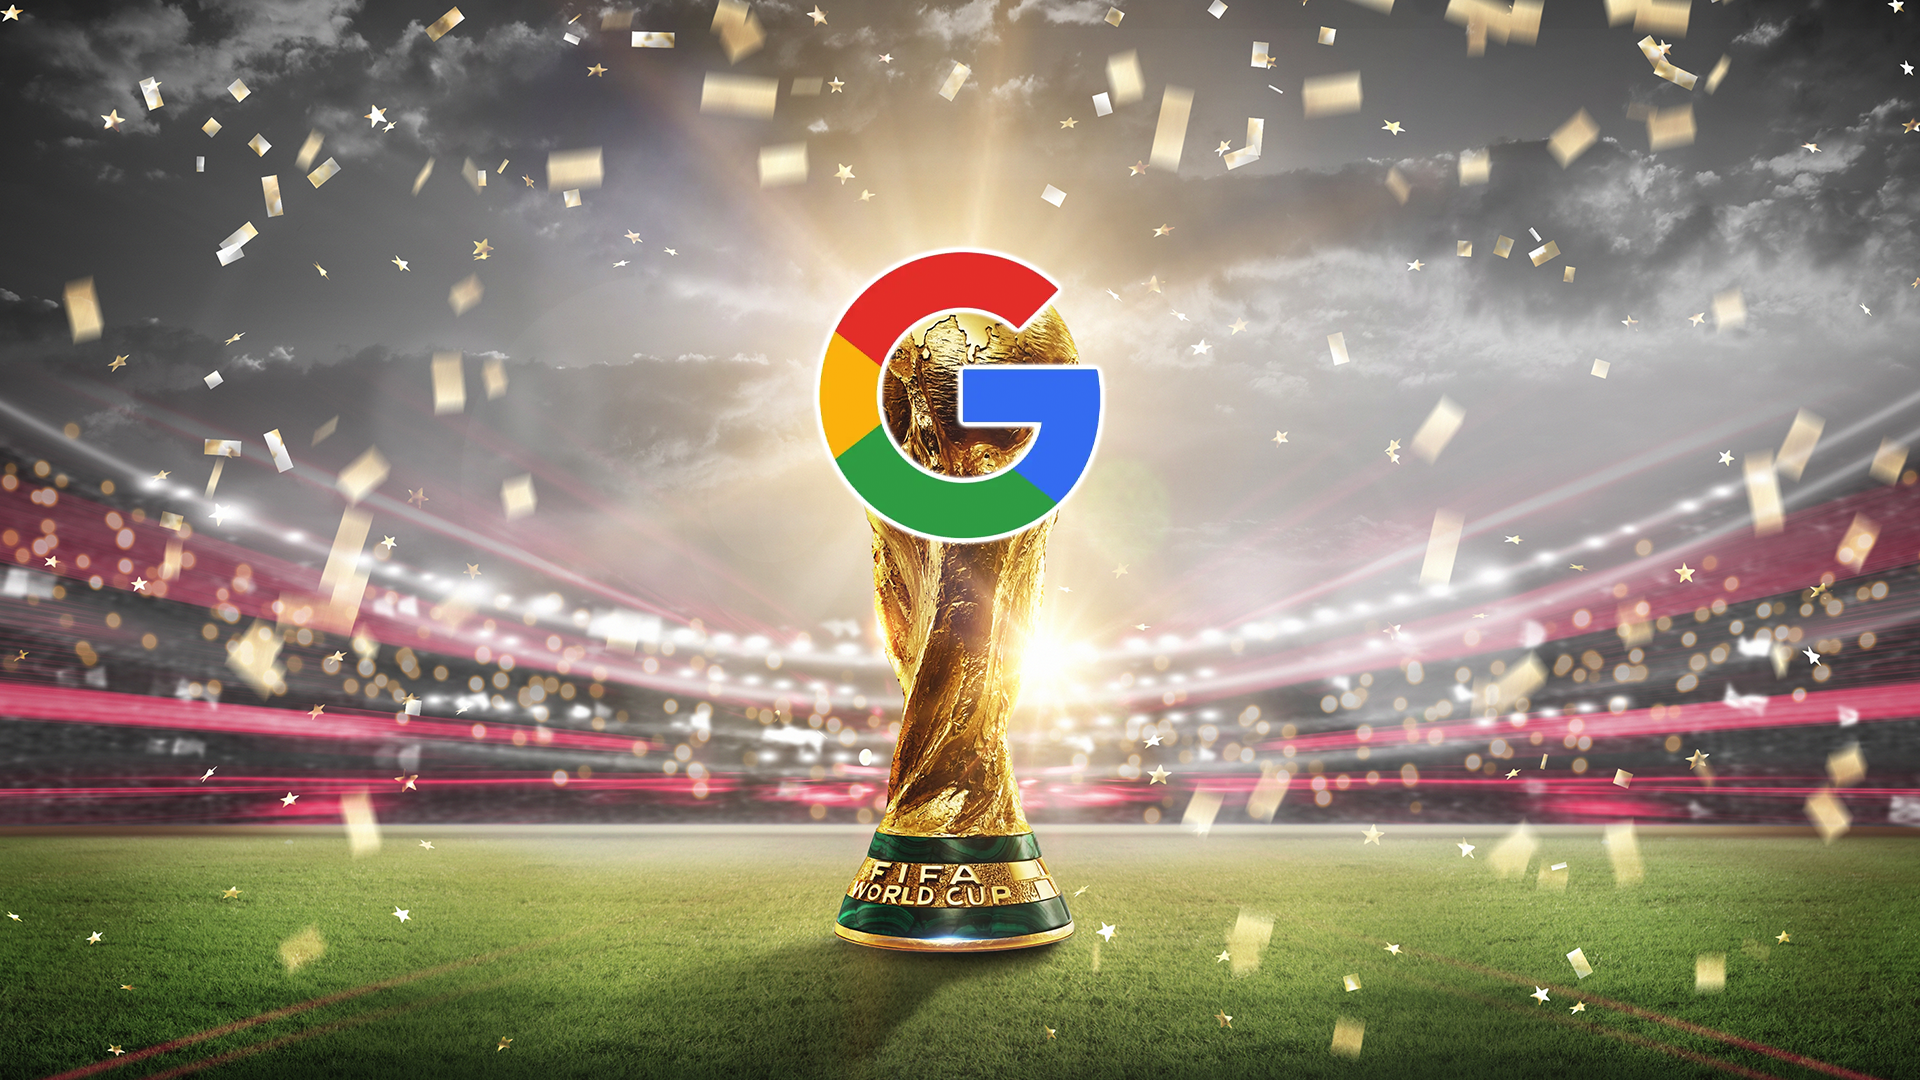 The Google logo over an illustration of the World Cup trophy.